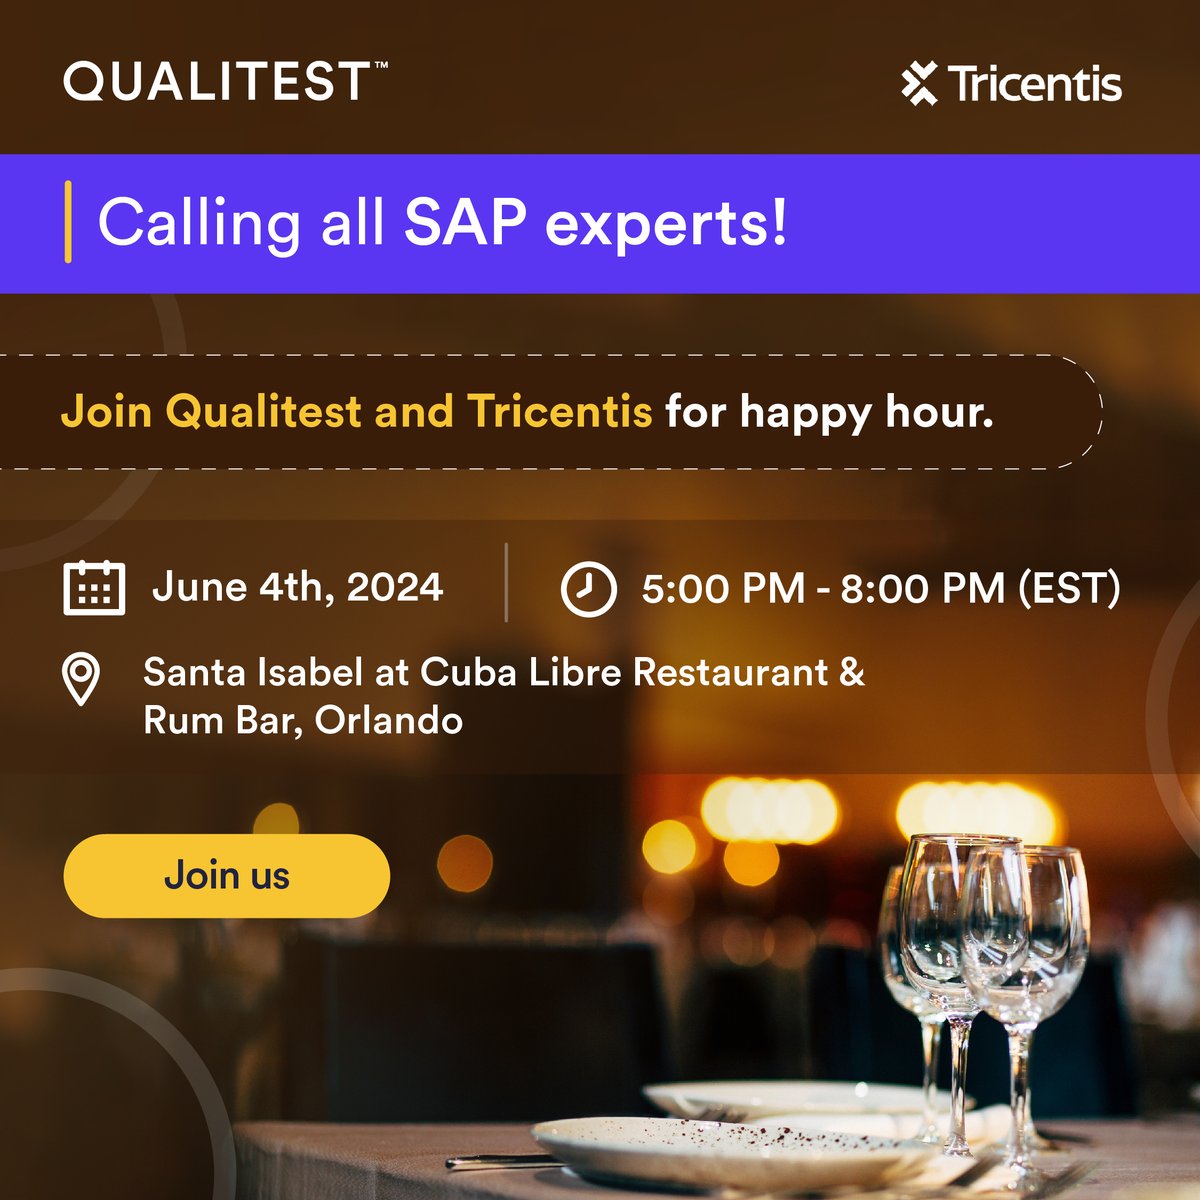 🌟 Join us for a night of networking and fun at Cuba Libre, Orlando on June 4, hosted by Qualitest and @Tricentis.
Network, share insights, and discover innovative solutions.
RSVP today—space is limited bit.ly/3vXsqE3
#SAPSapphire #QualitestAtSAPSapphire #LifeAtQualitest